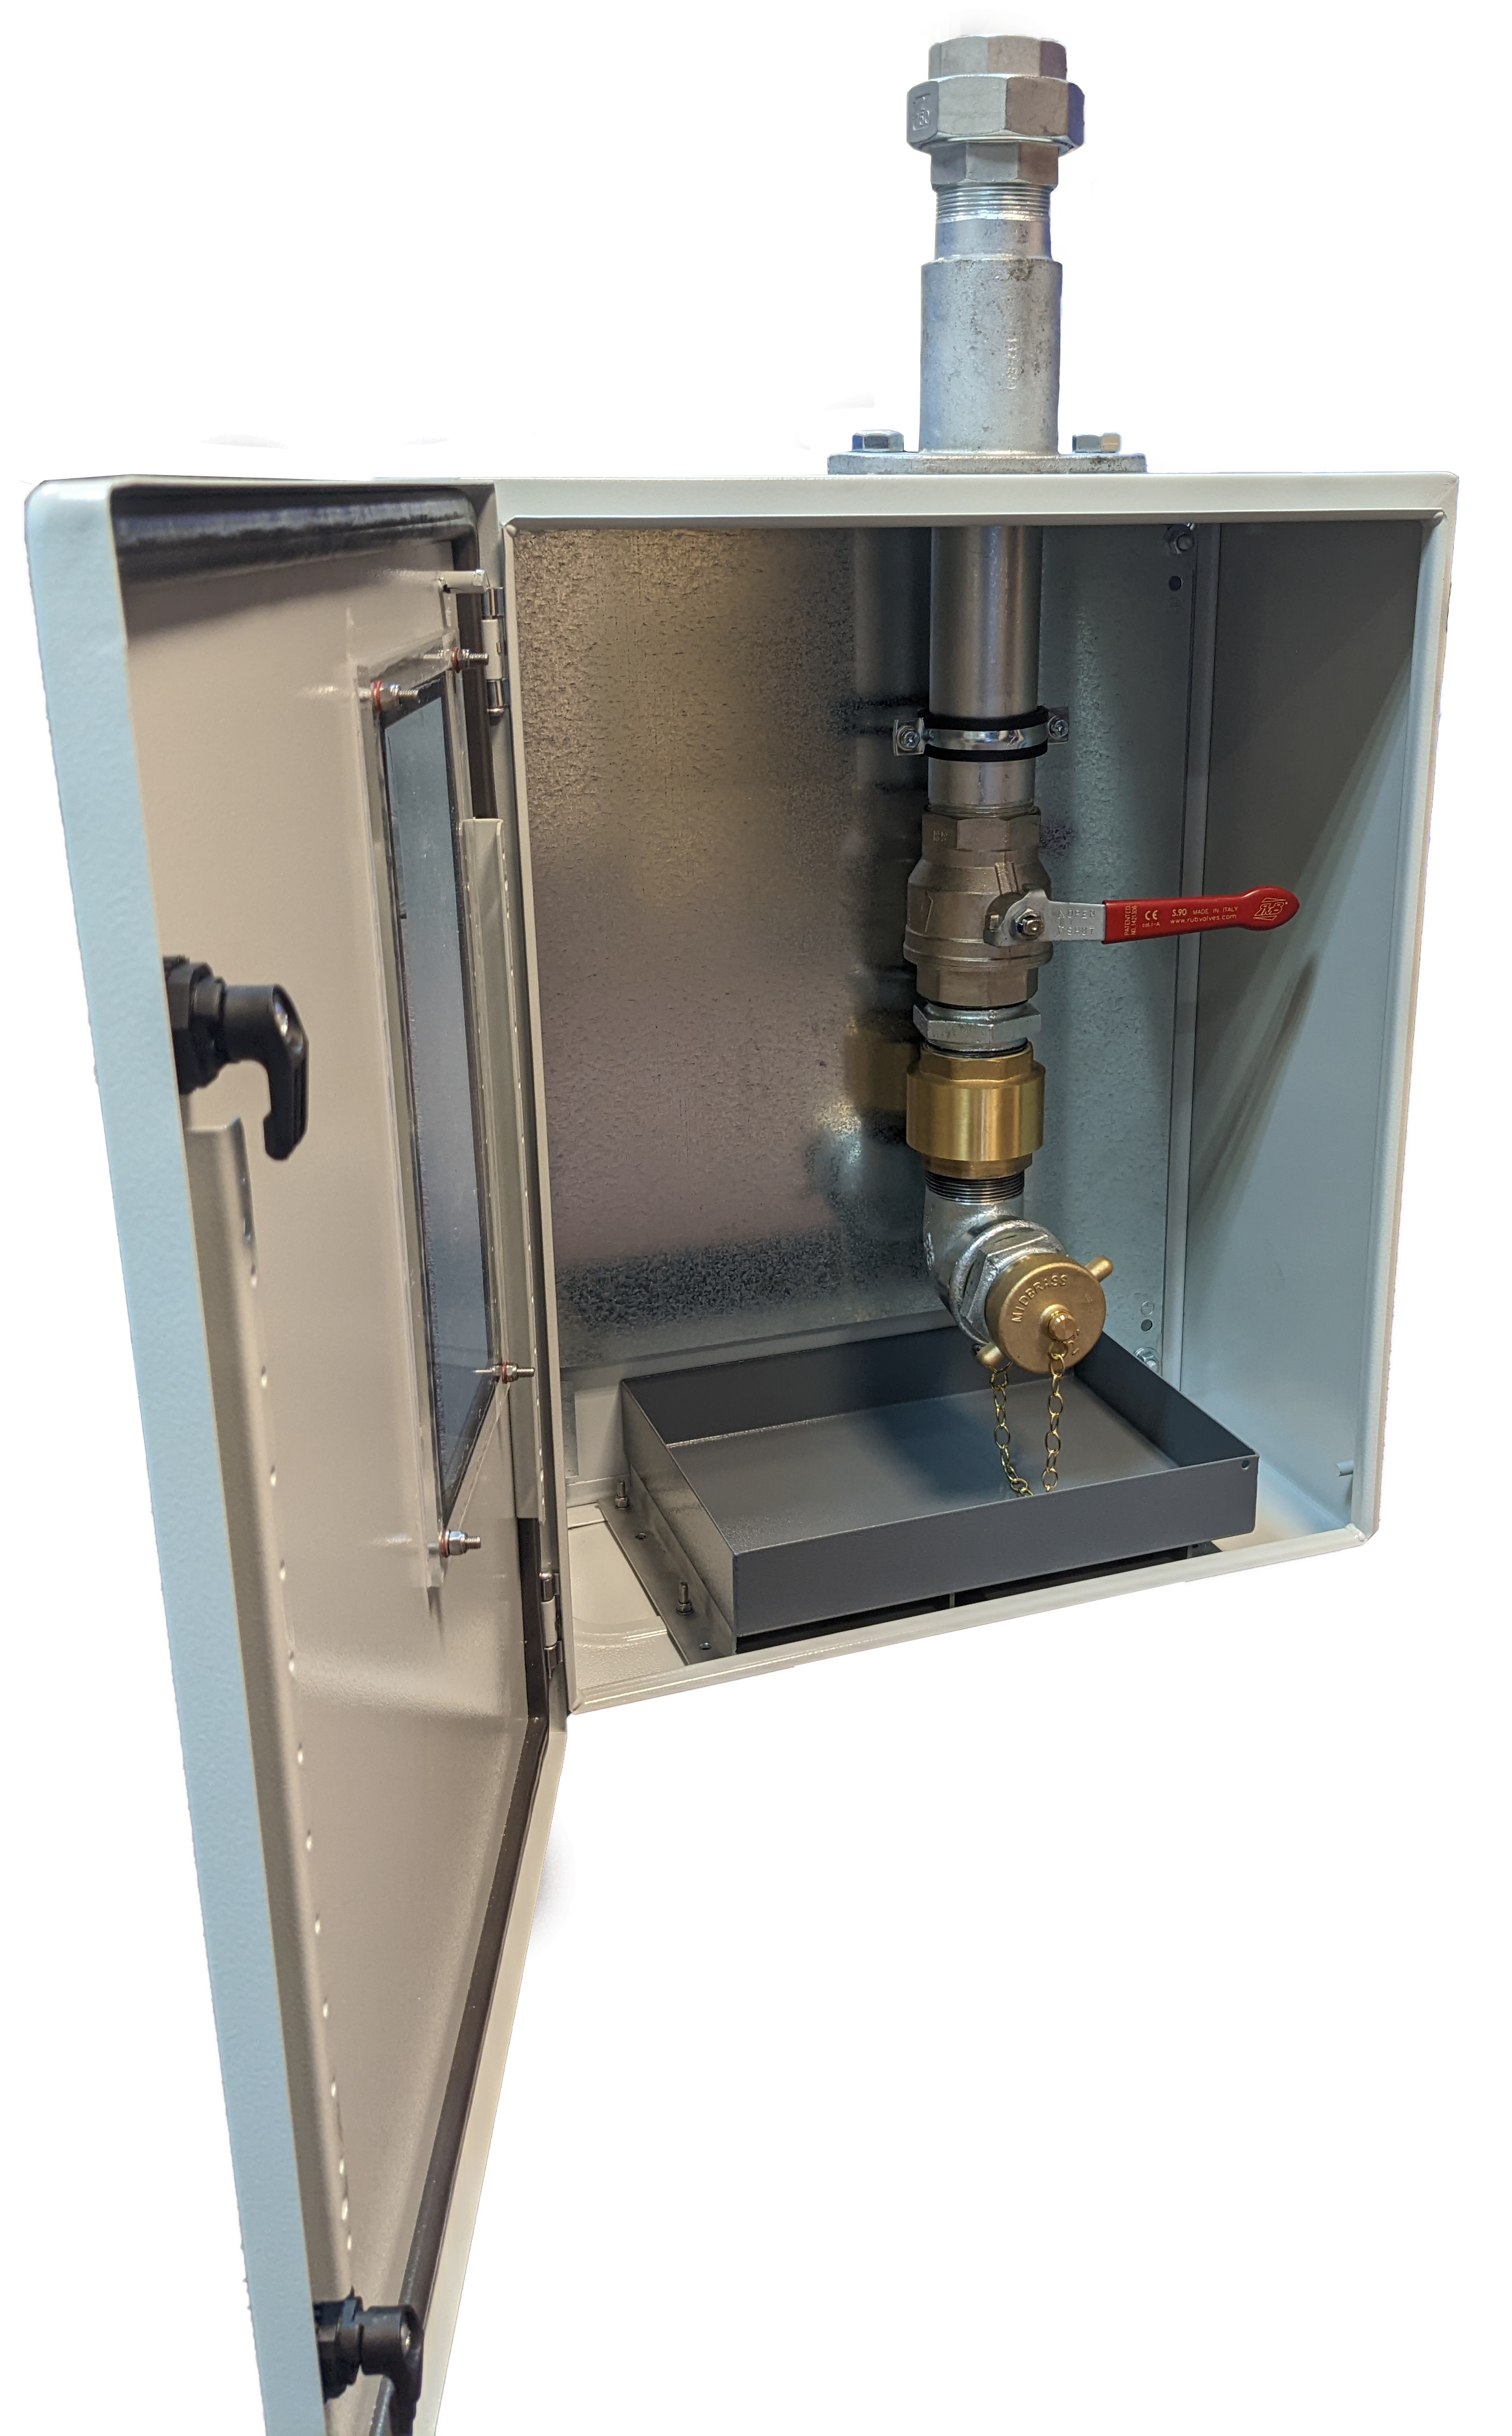 Bespoke Fill and Polishing Cabinets Landon Kingsway Stainless Steel Free Fall Fire Valve